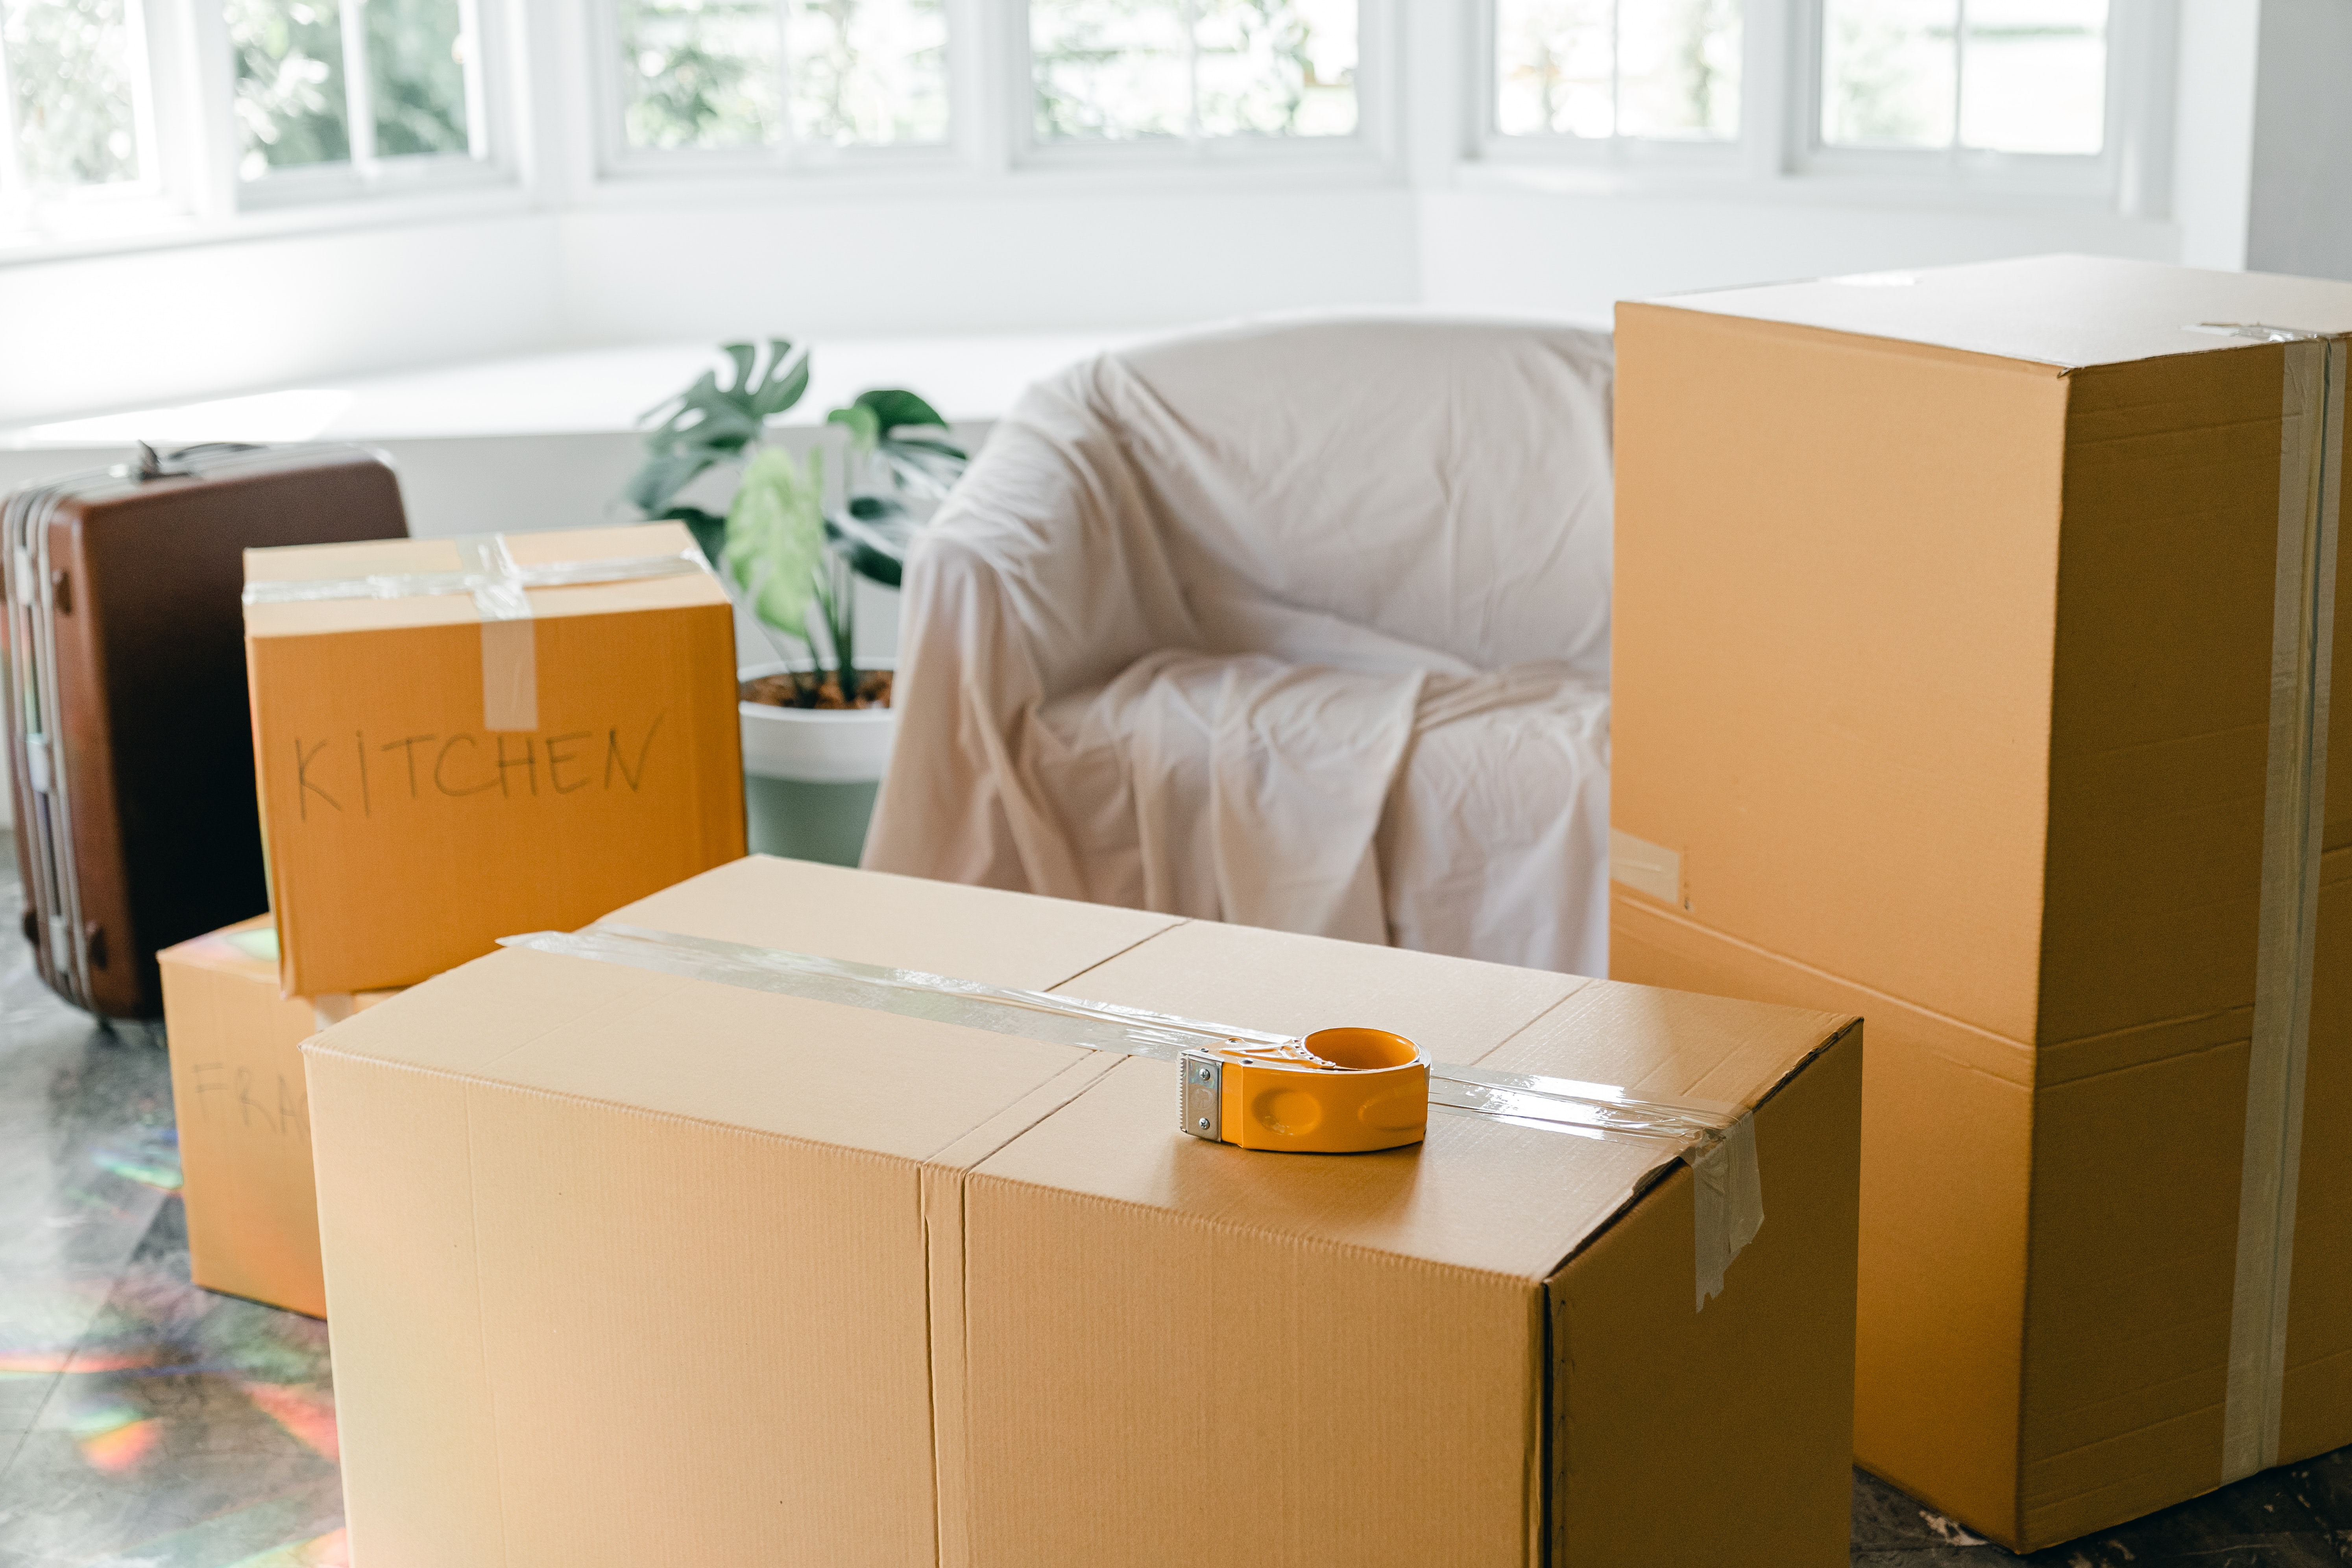 stock photo featuring moving boxes, unpacked living room in new home.